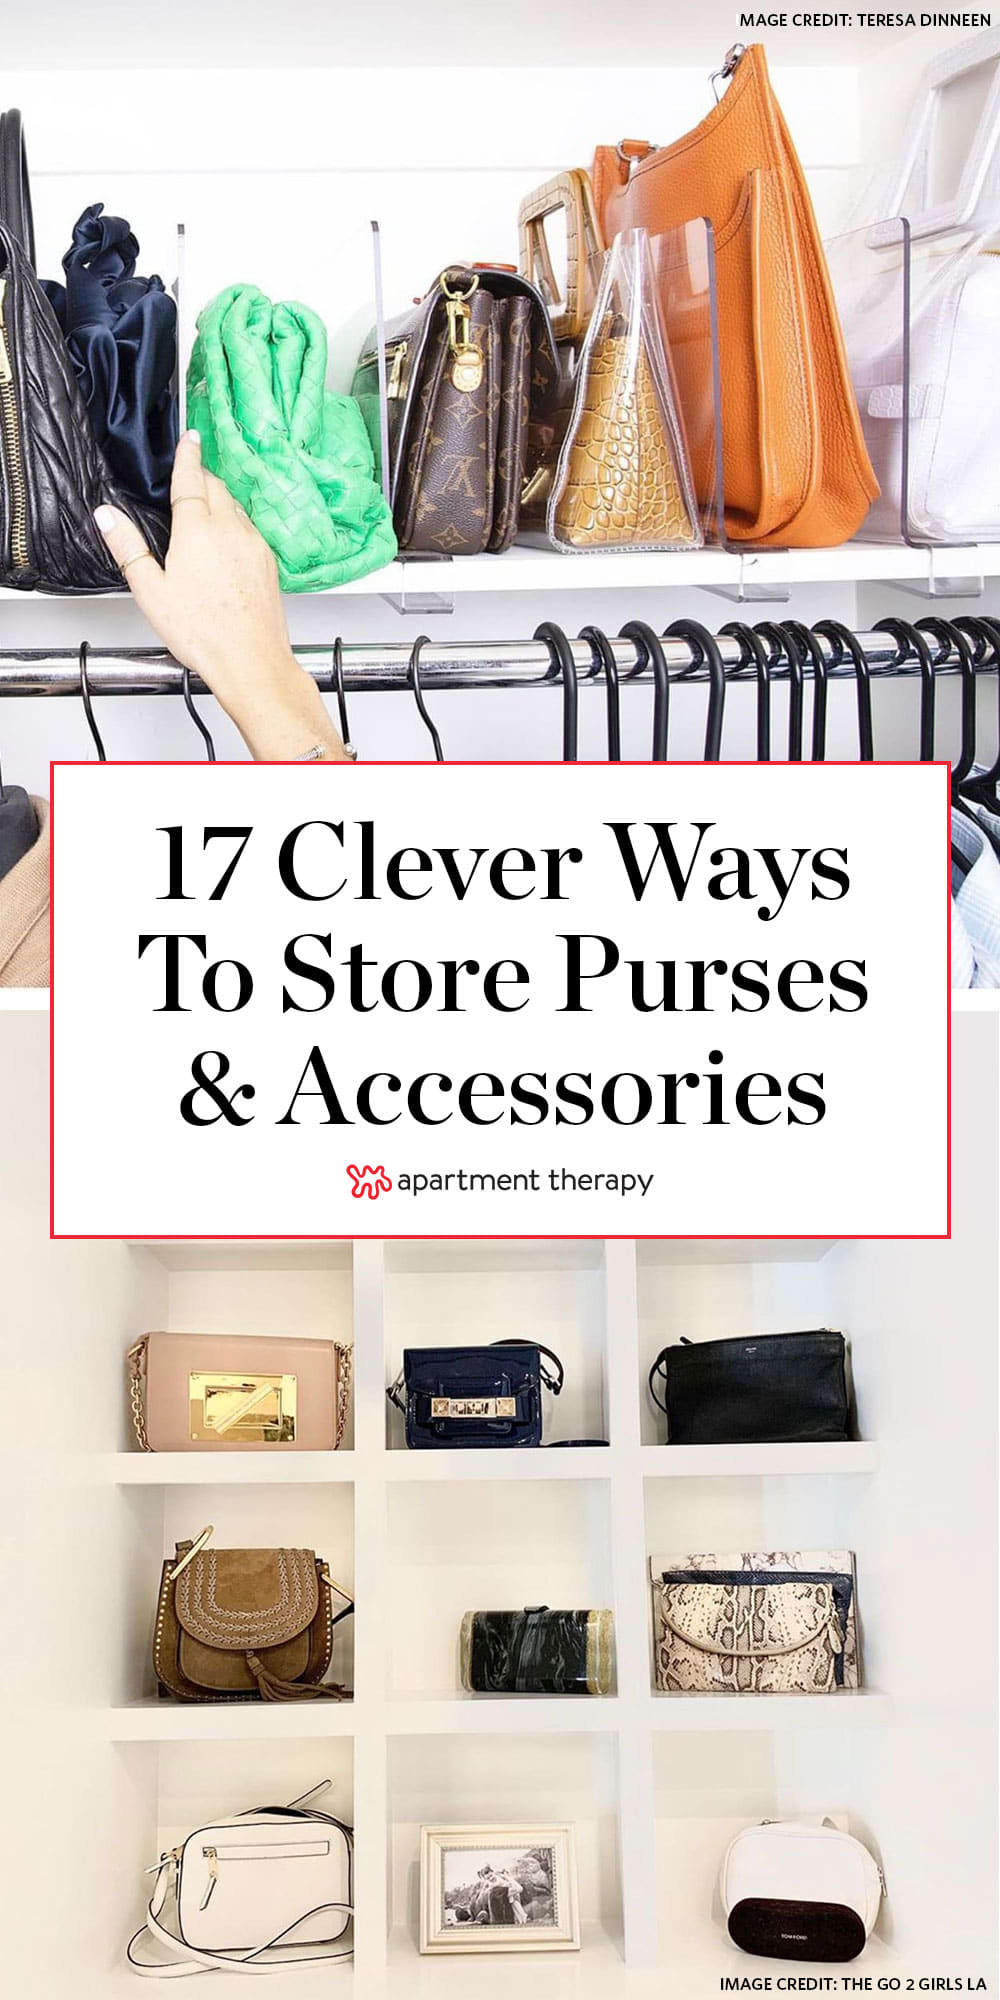 Stow Away Your Accessories in Style With These Purse Storage Ideas